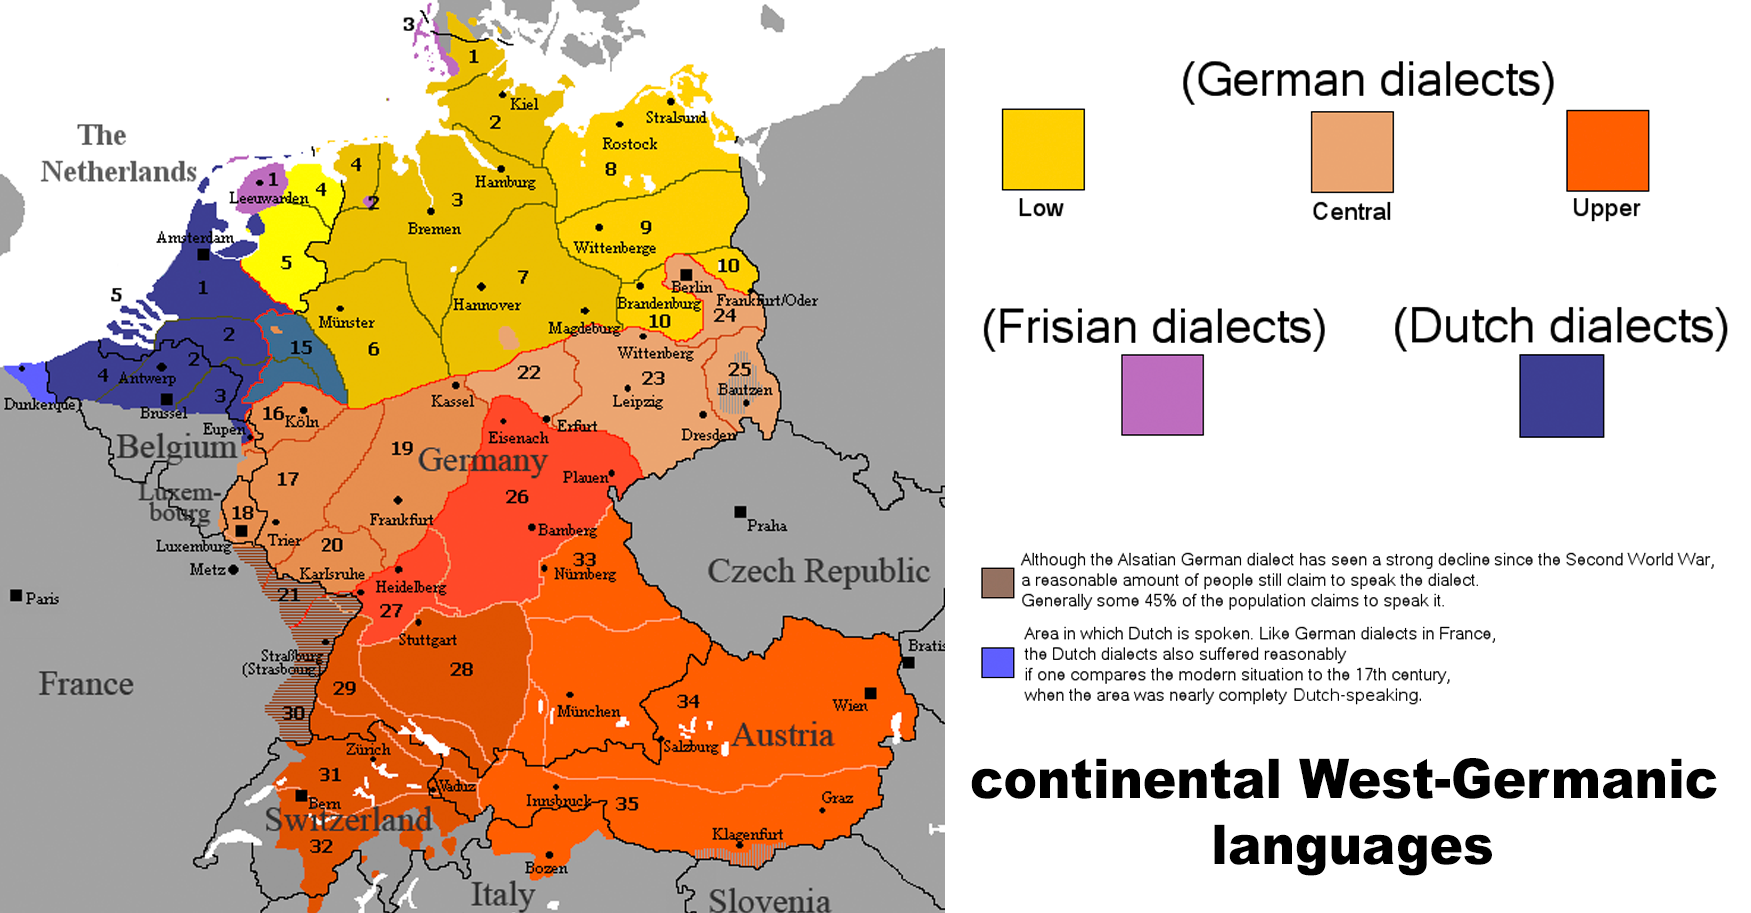 a map of West-Germanic languages